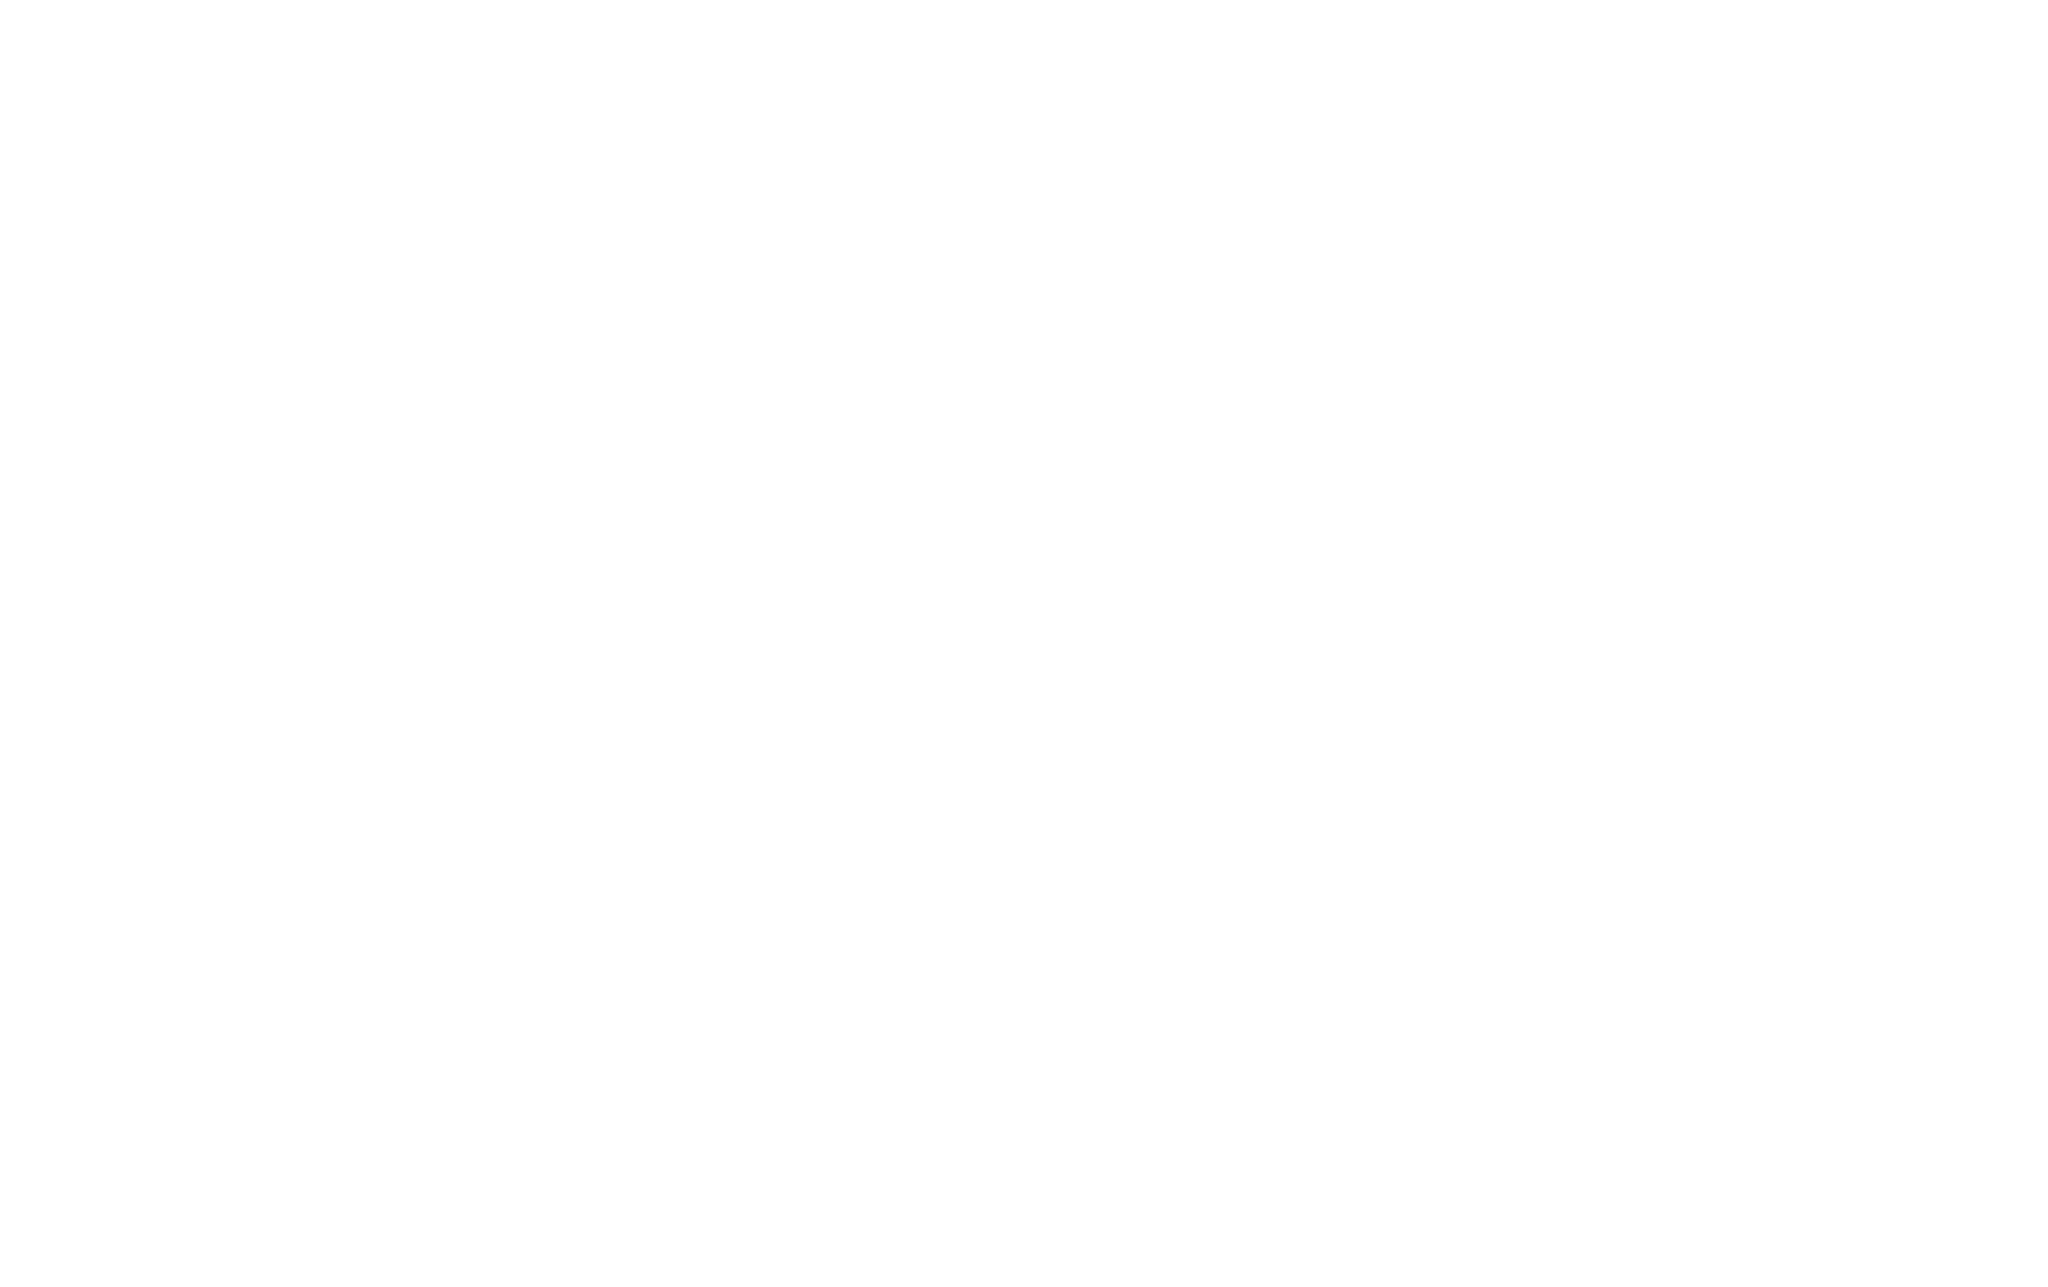 https://cleantheworld.org/wp-content/uploads/3-logos-clear-01-2048x1287.png